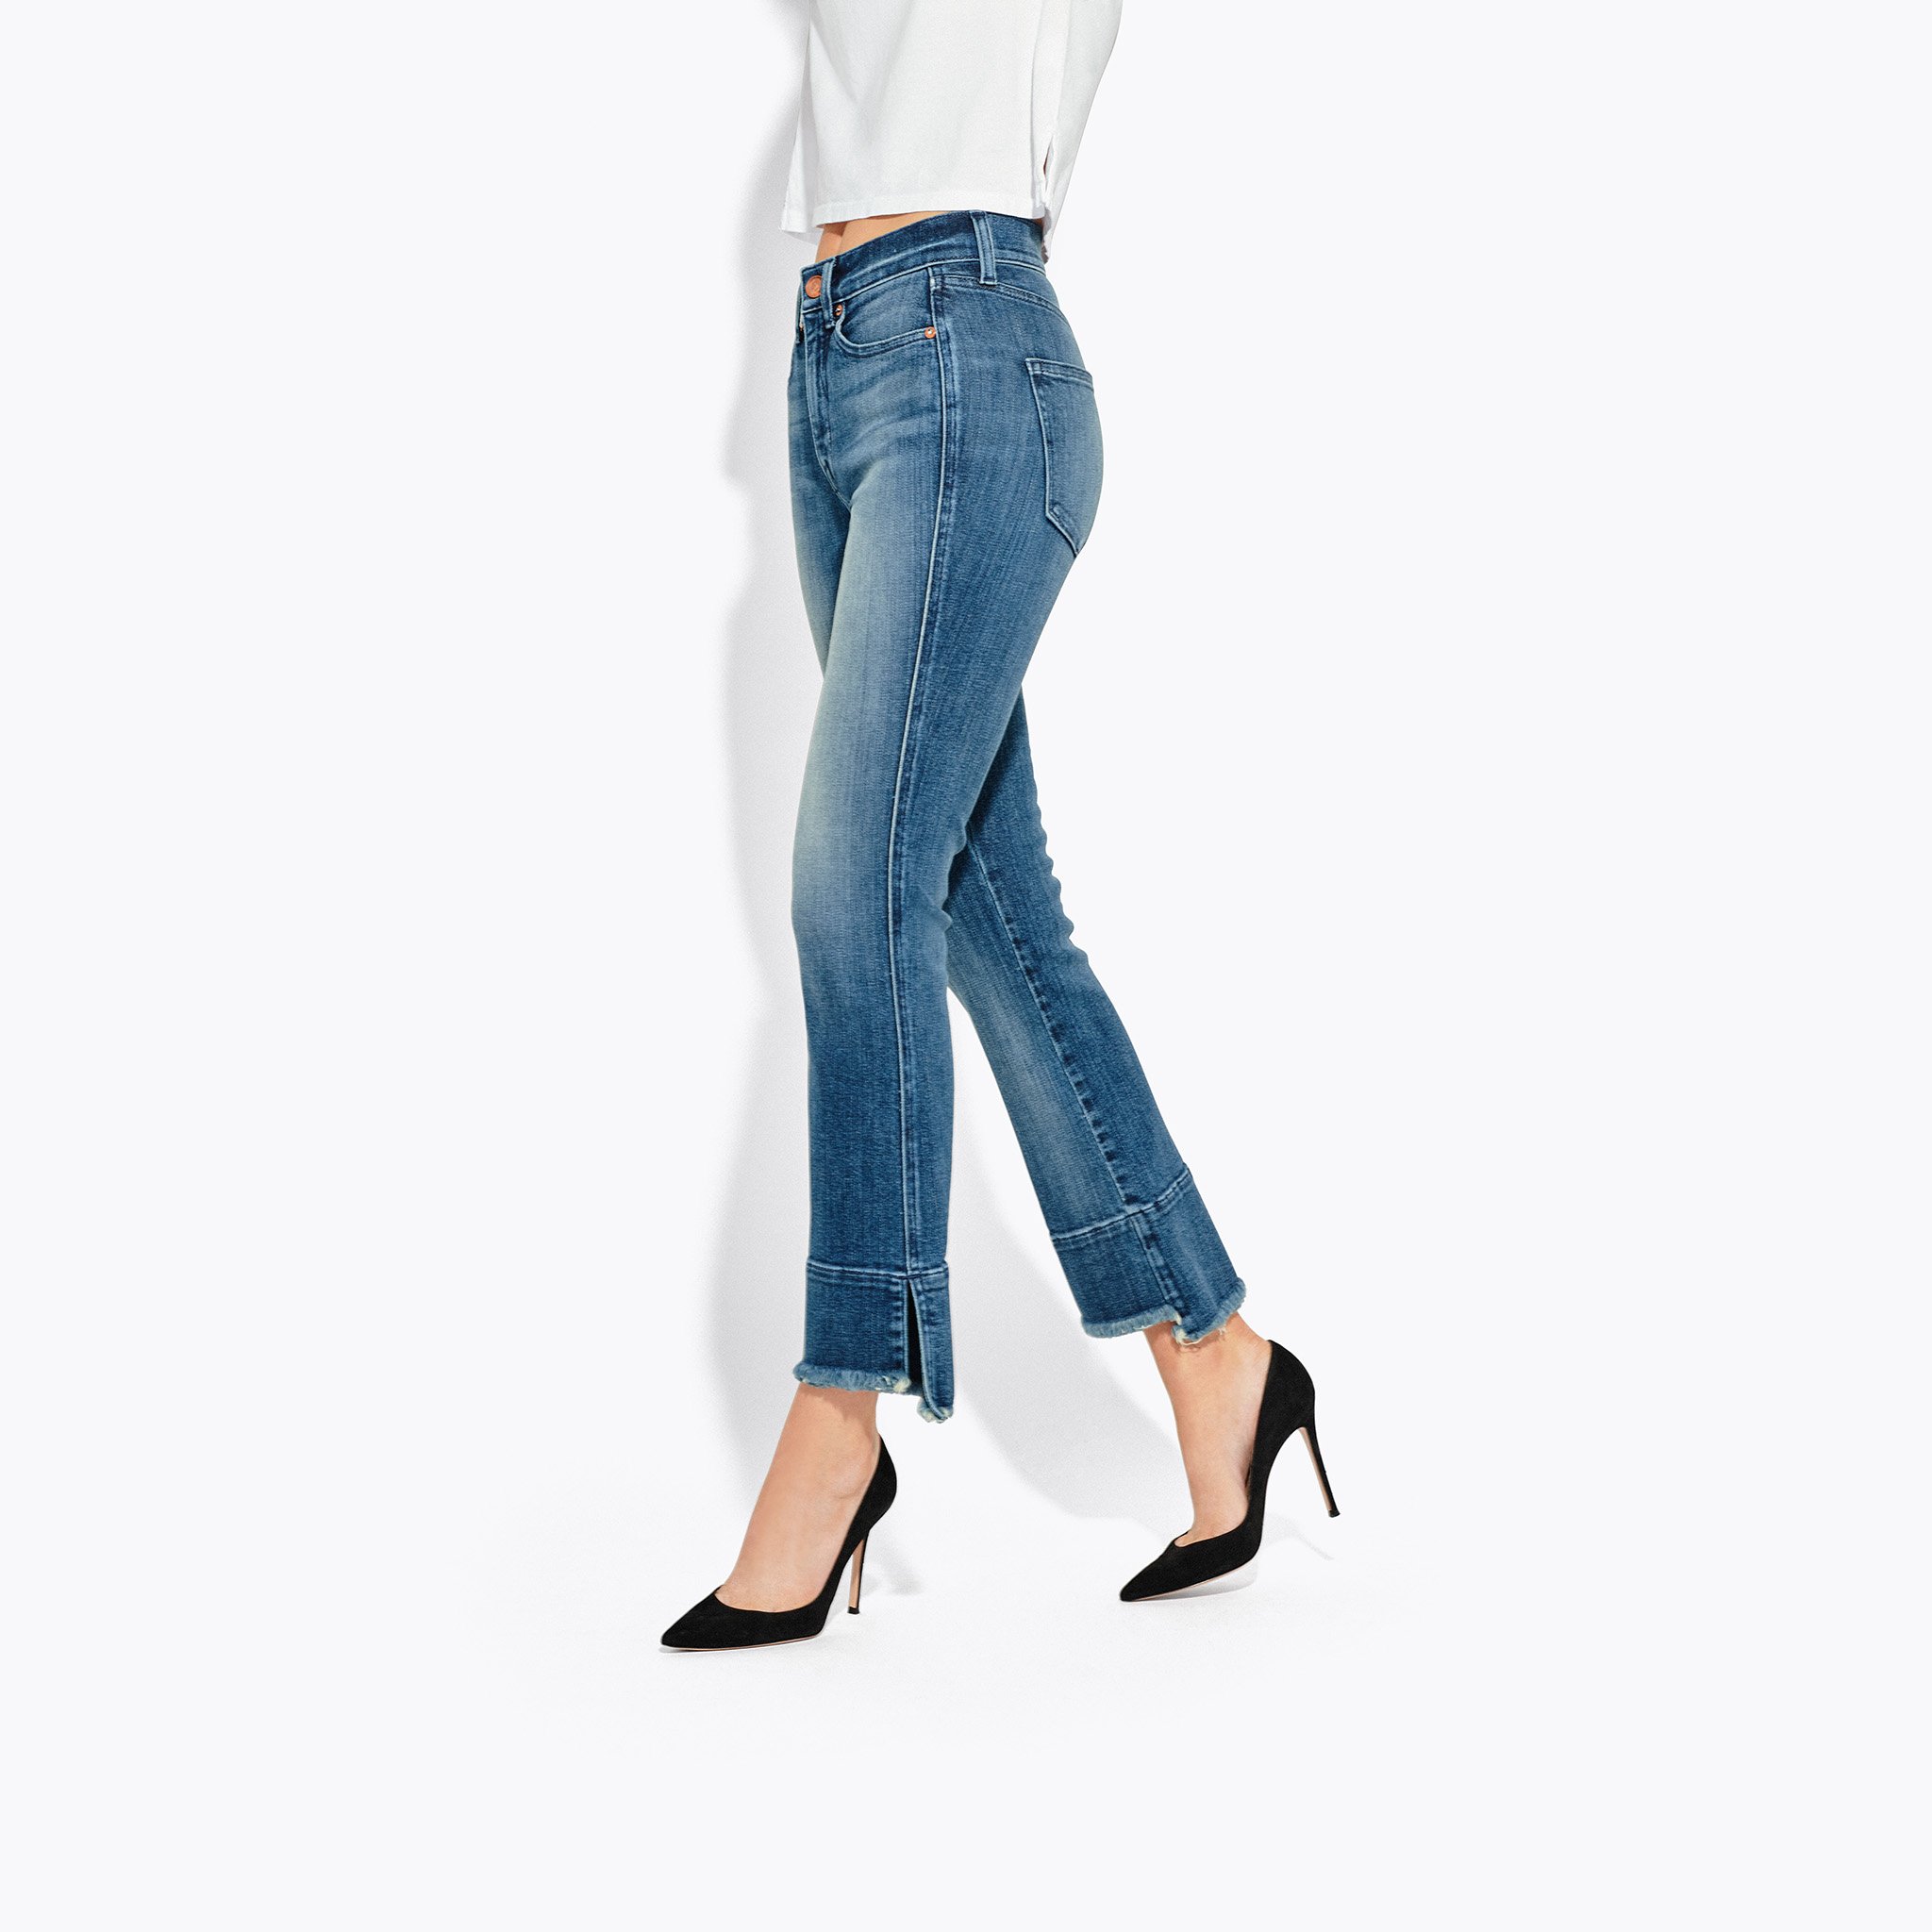 The Shade Jeans JN125